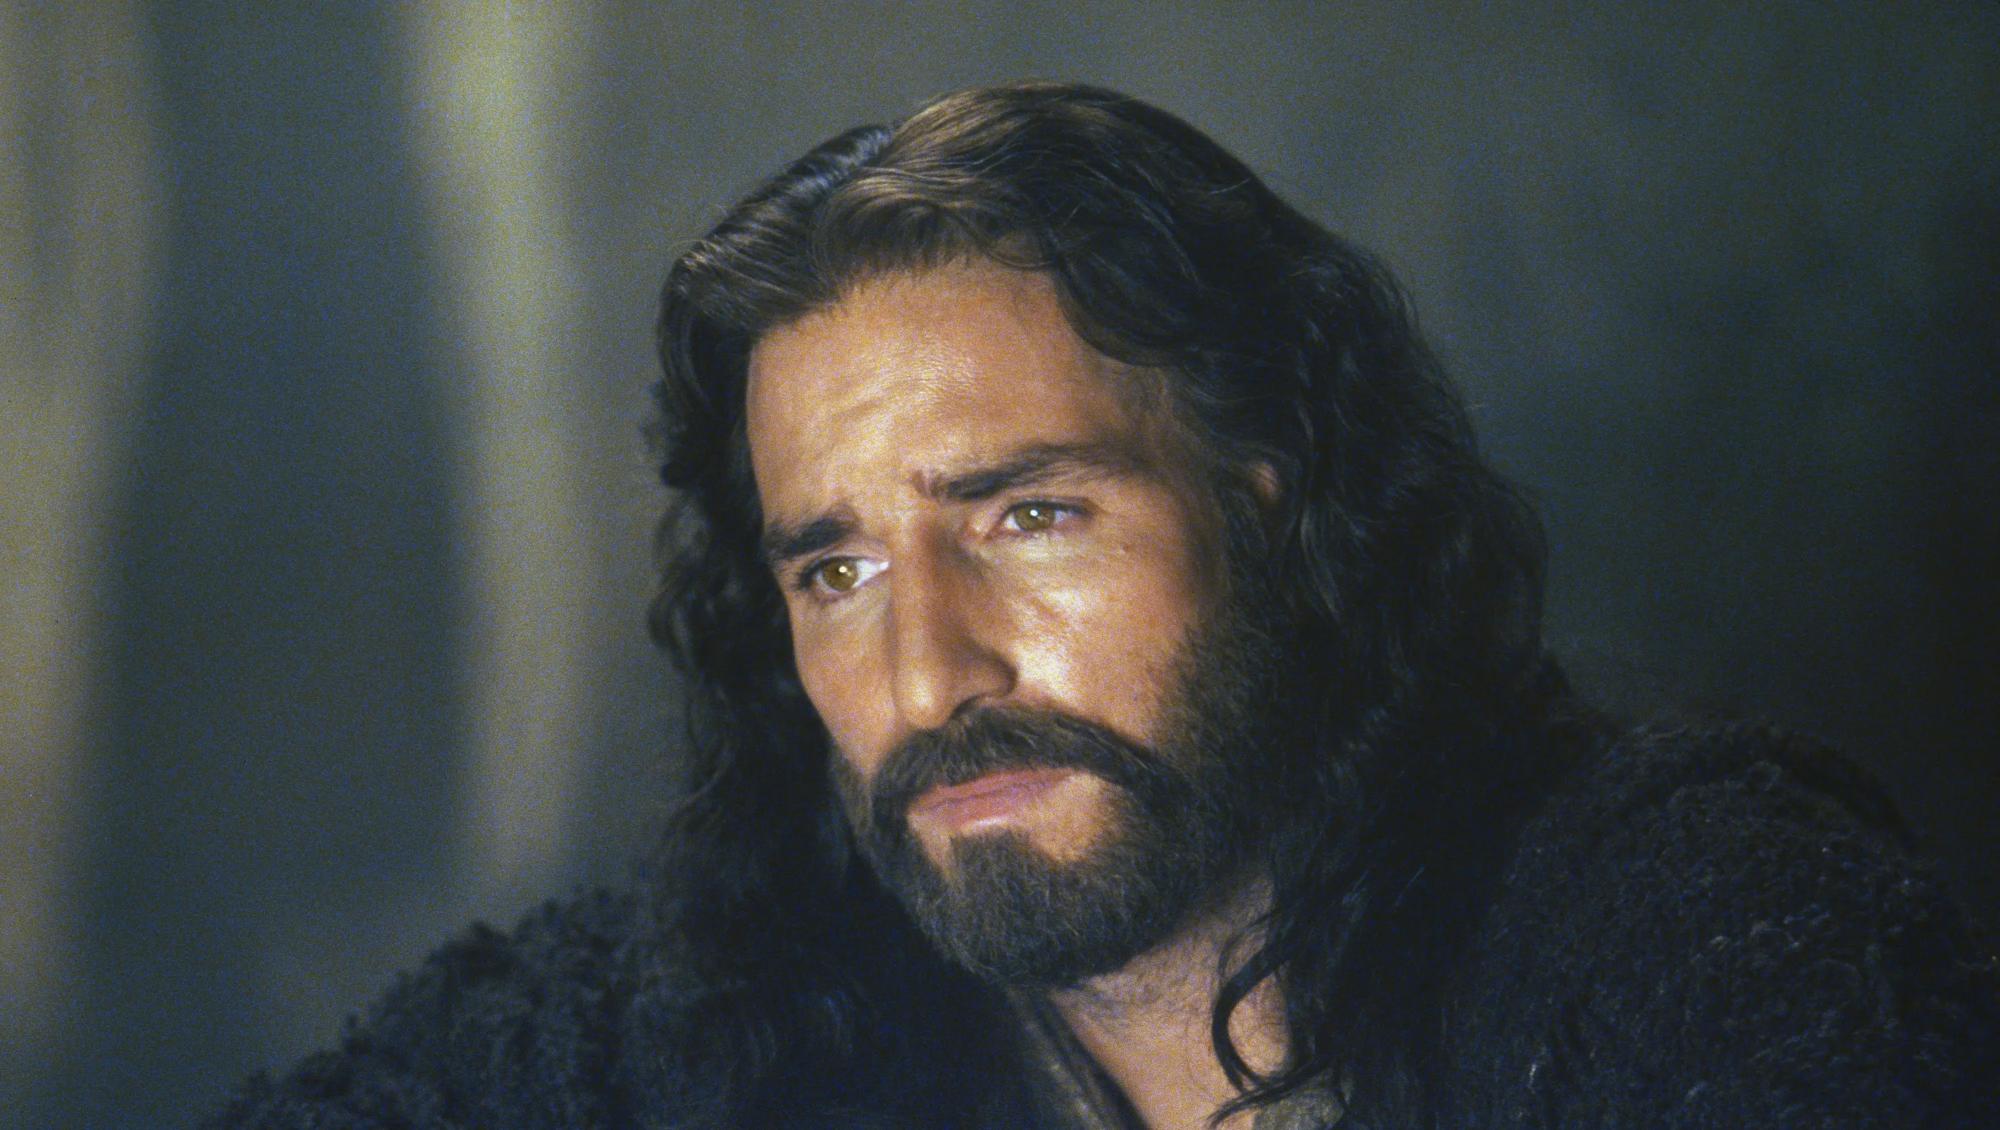 'The Passion of the Christ' Jim Caviezel as Jesus looking ahead with a sad expression